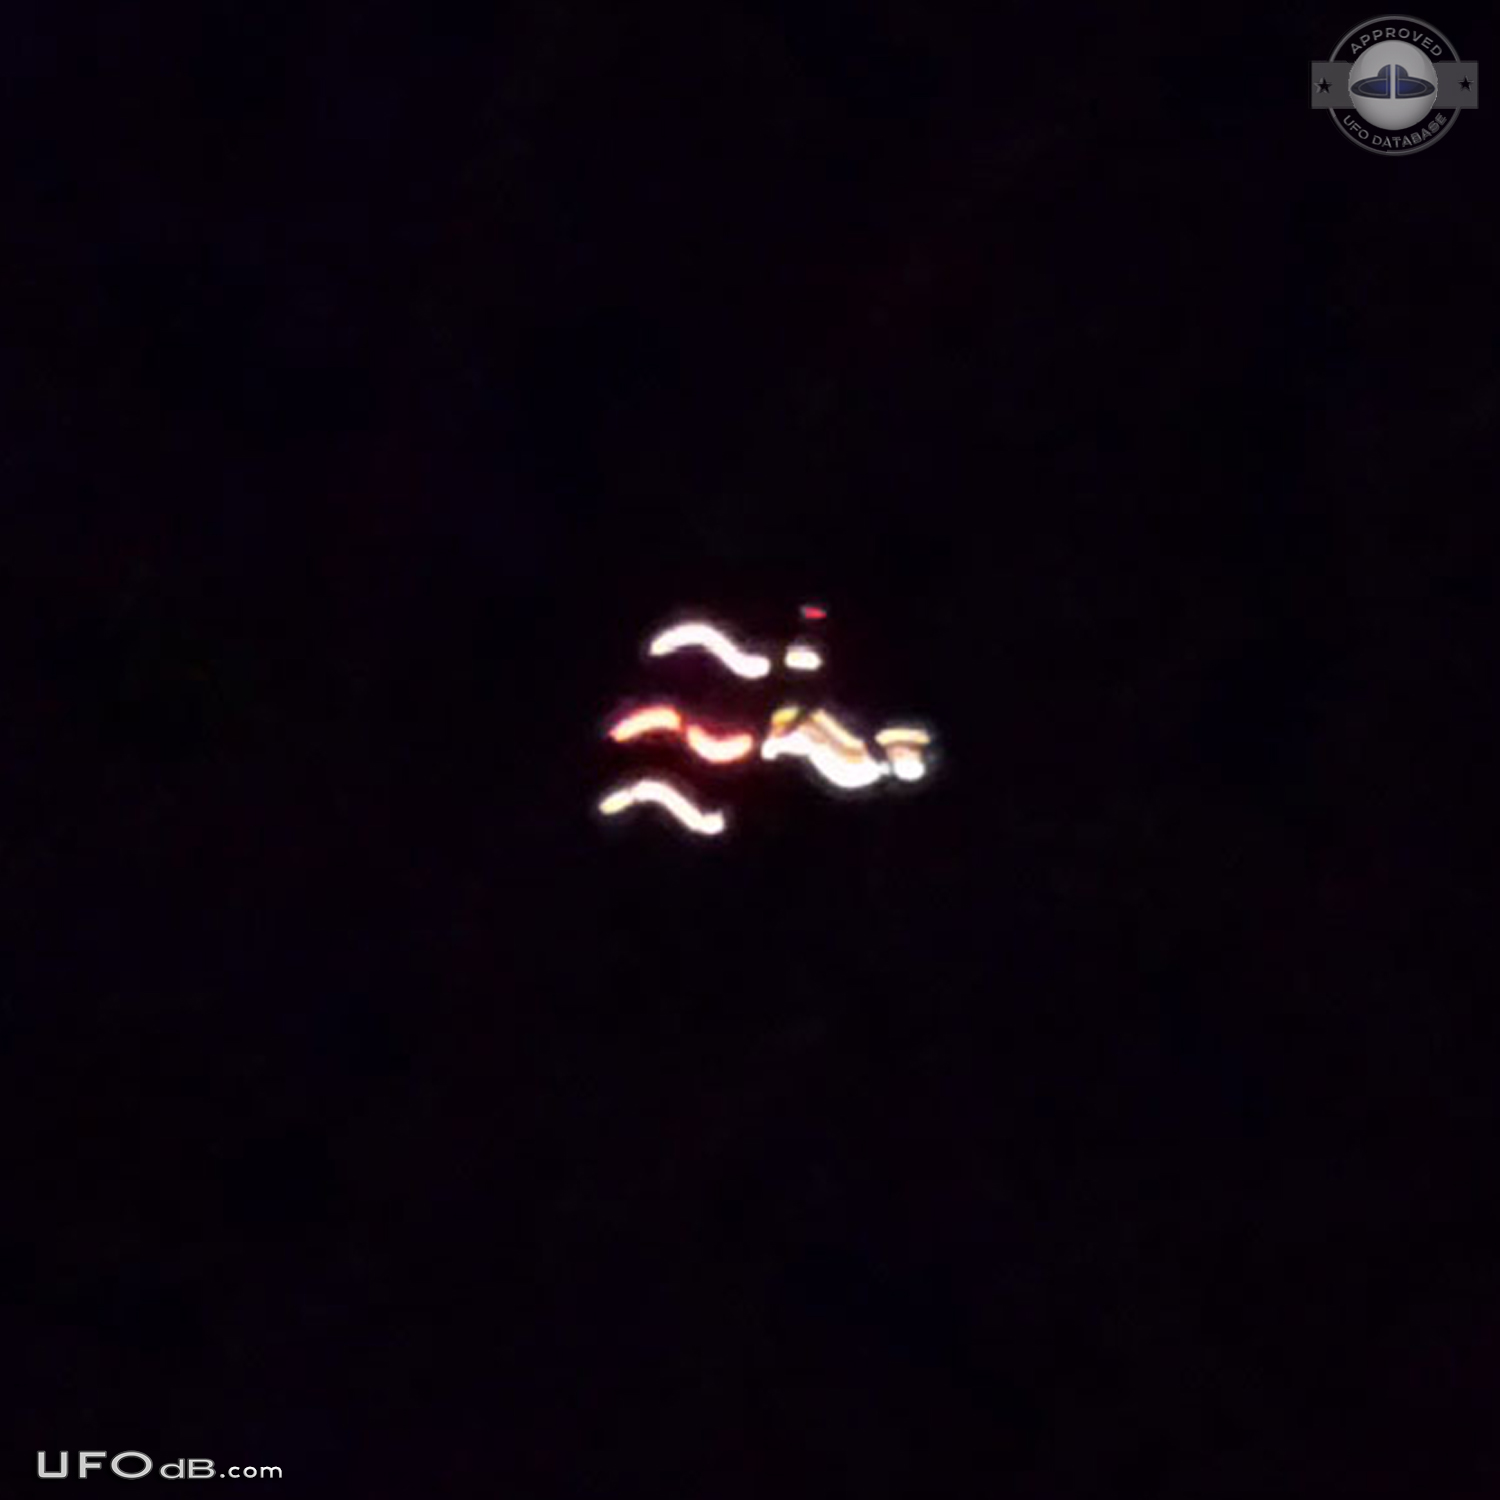 Strange object in the sky of Timmins Ontario Canada on January 22 2015 UFO Picture #581-6